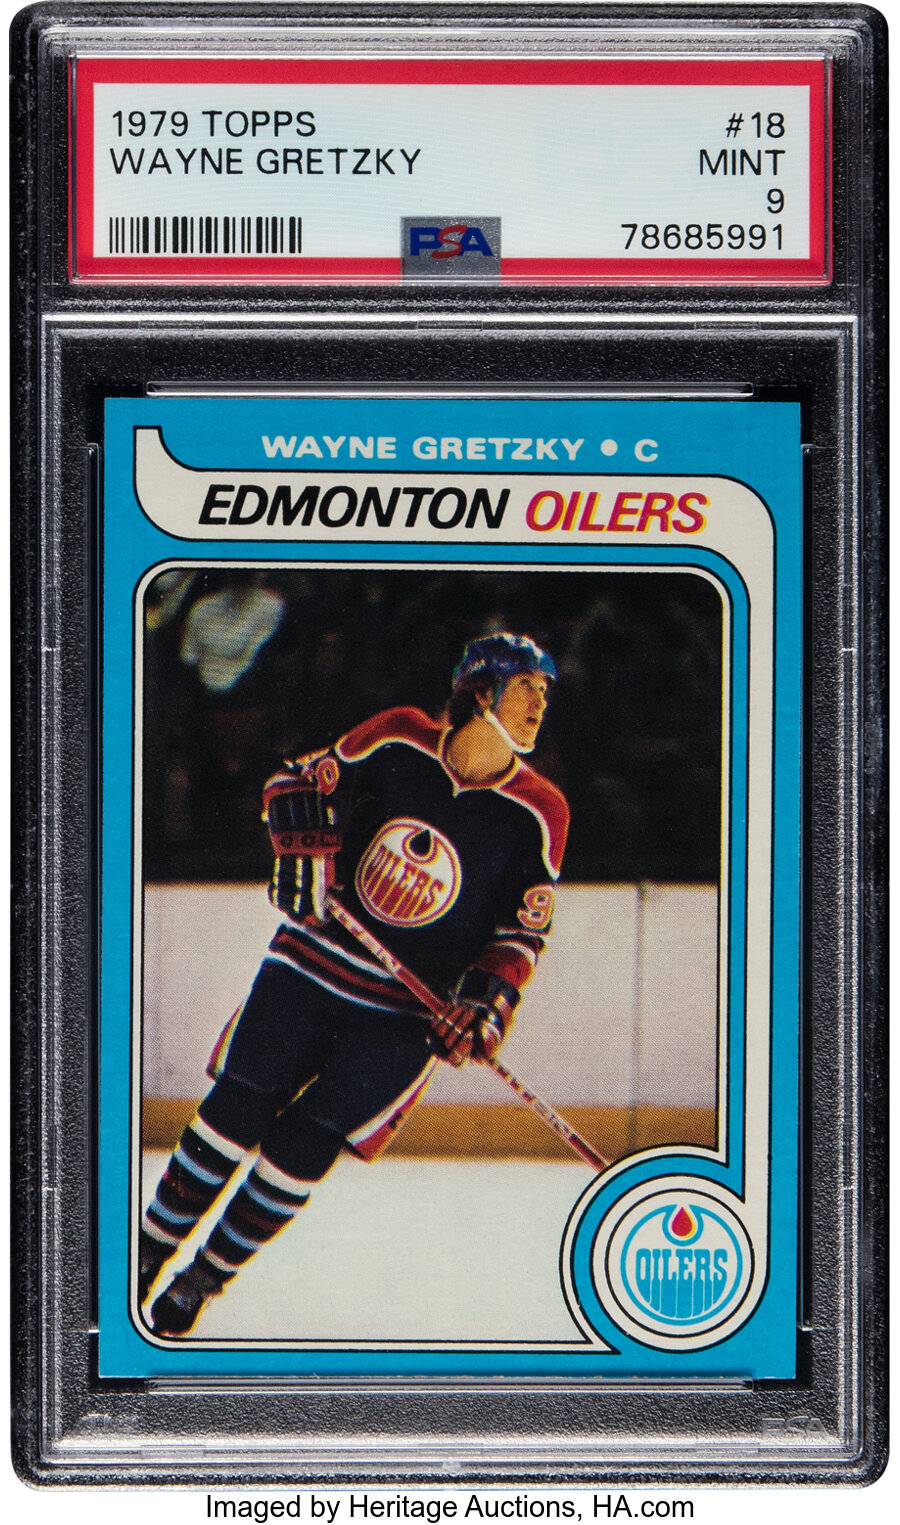 1979 Topps Wayne Gretzky Rookie #18 PSA Mint 9 - Only Two Higher!